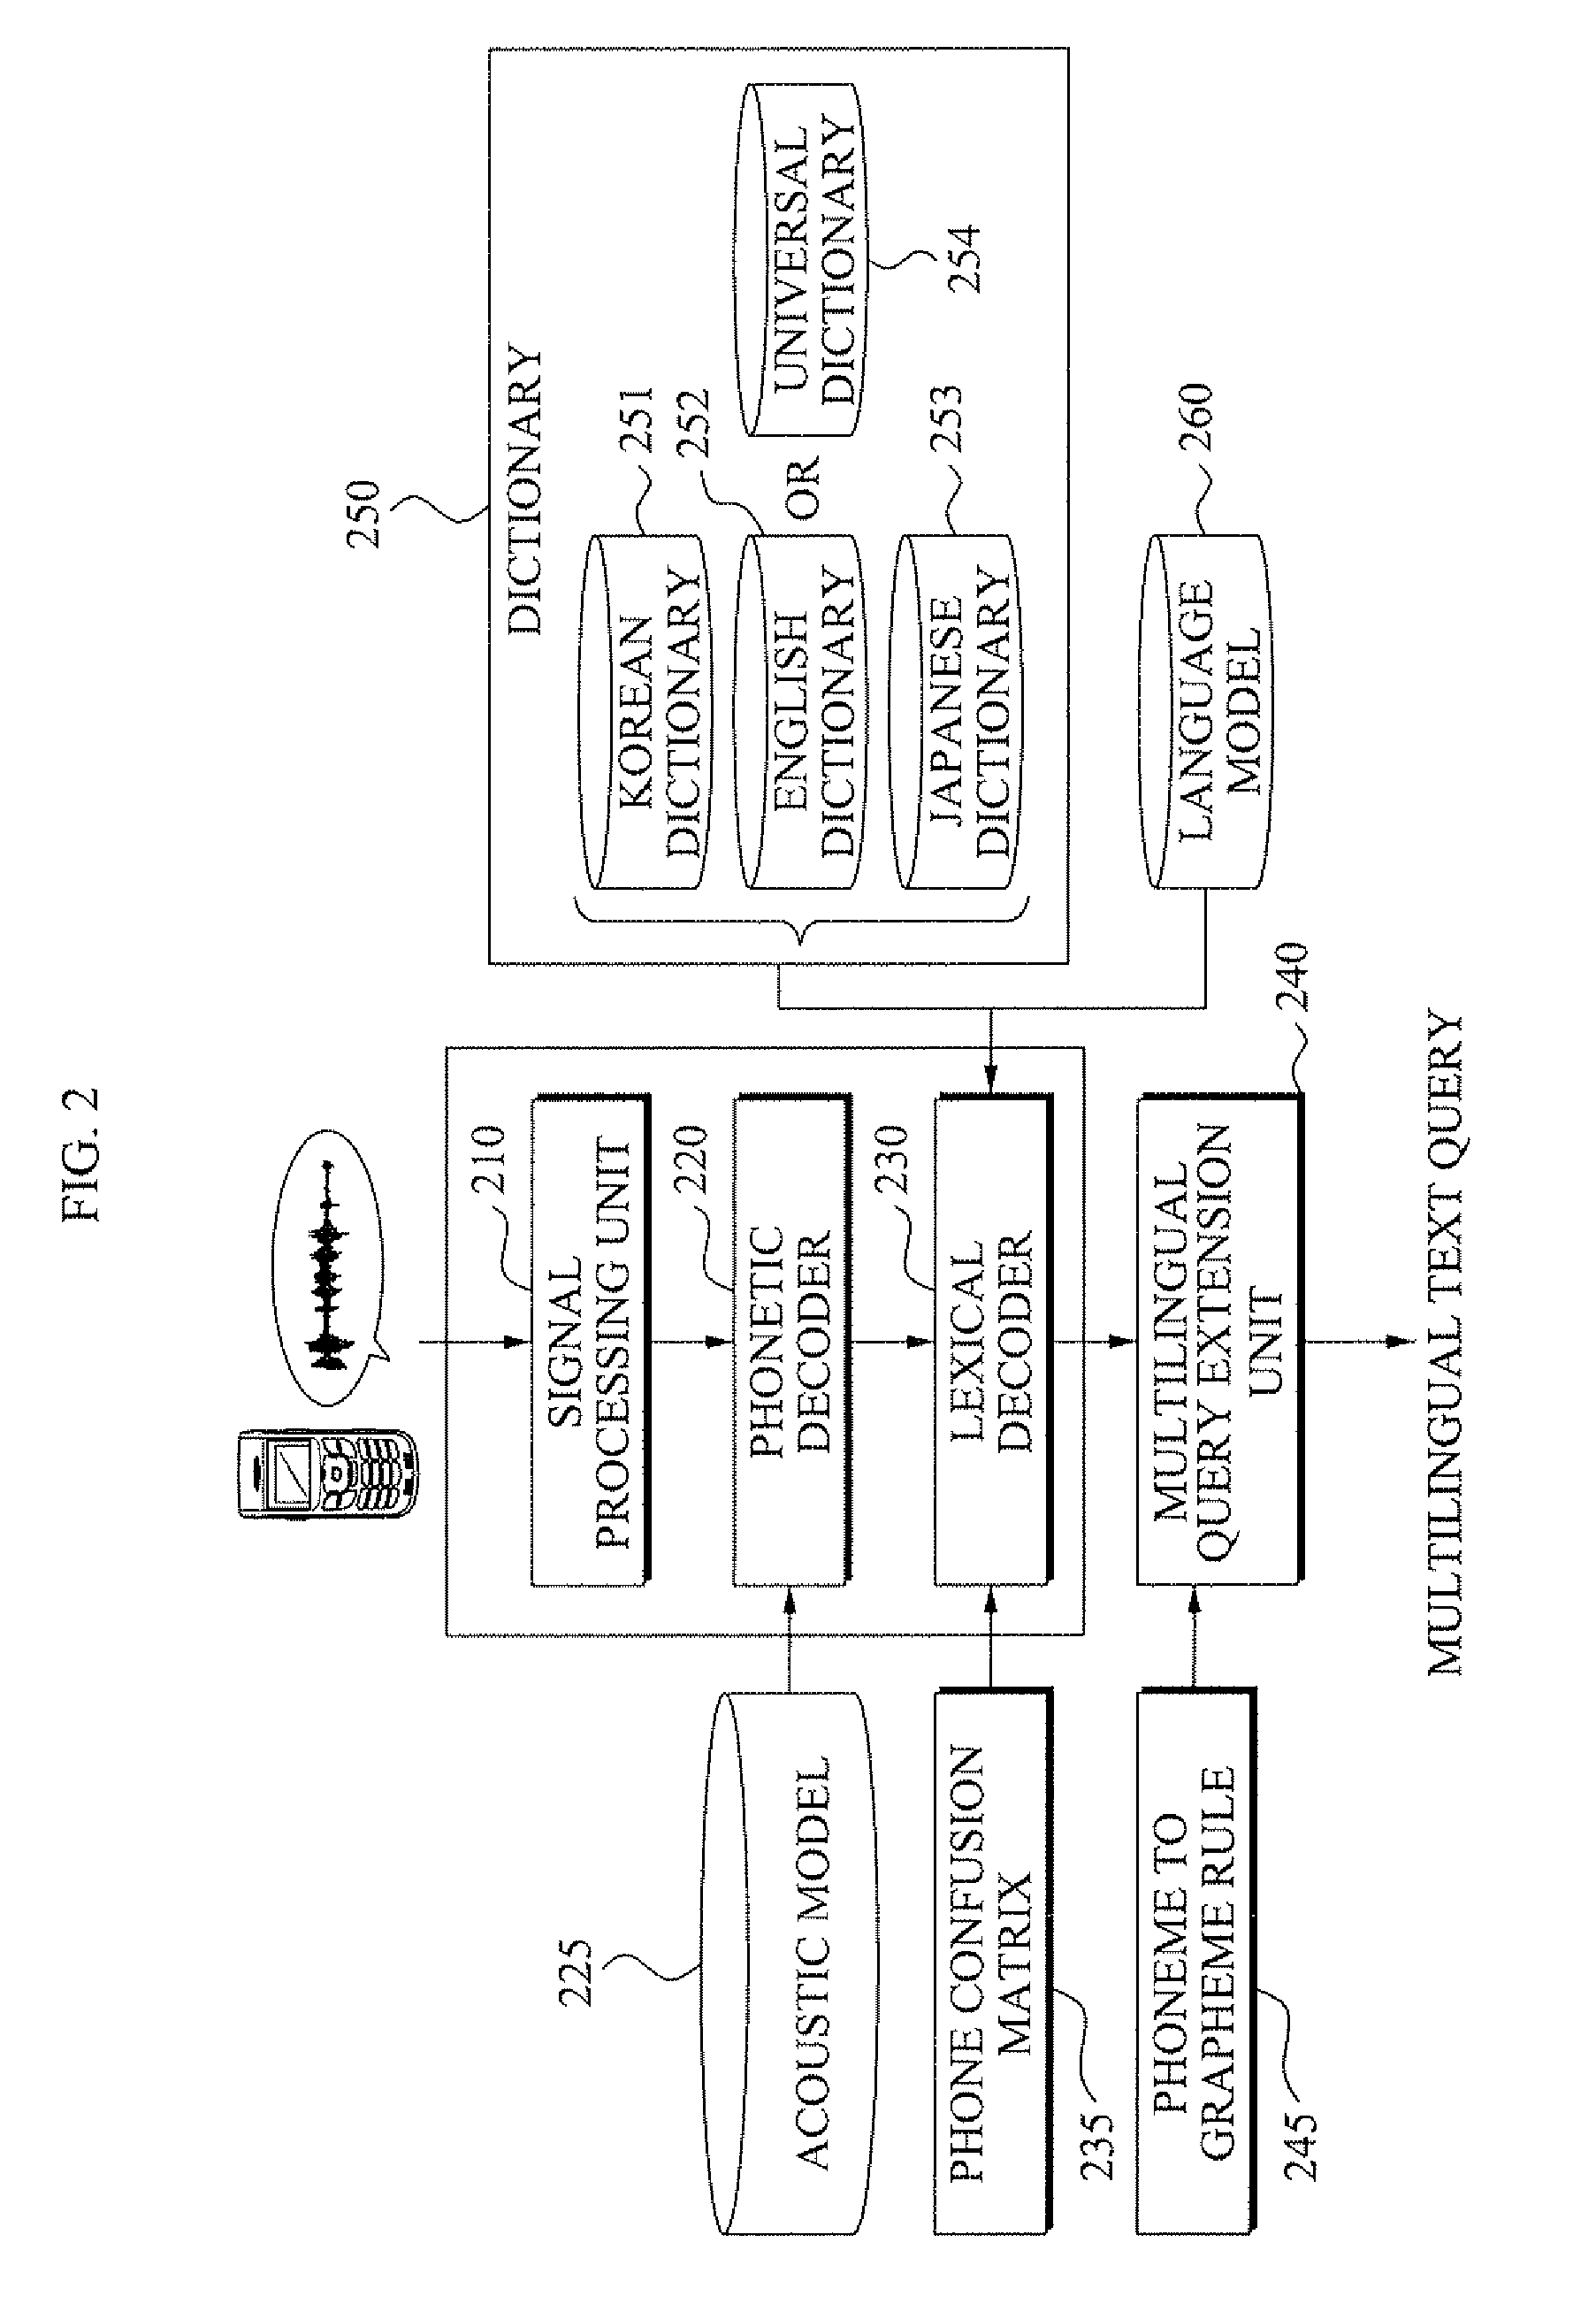 Voice query extension method and system